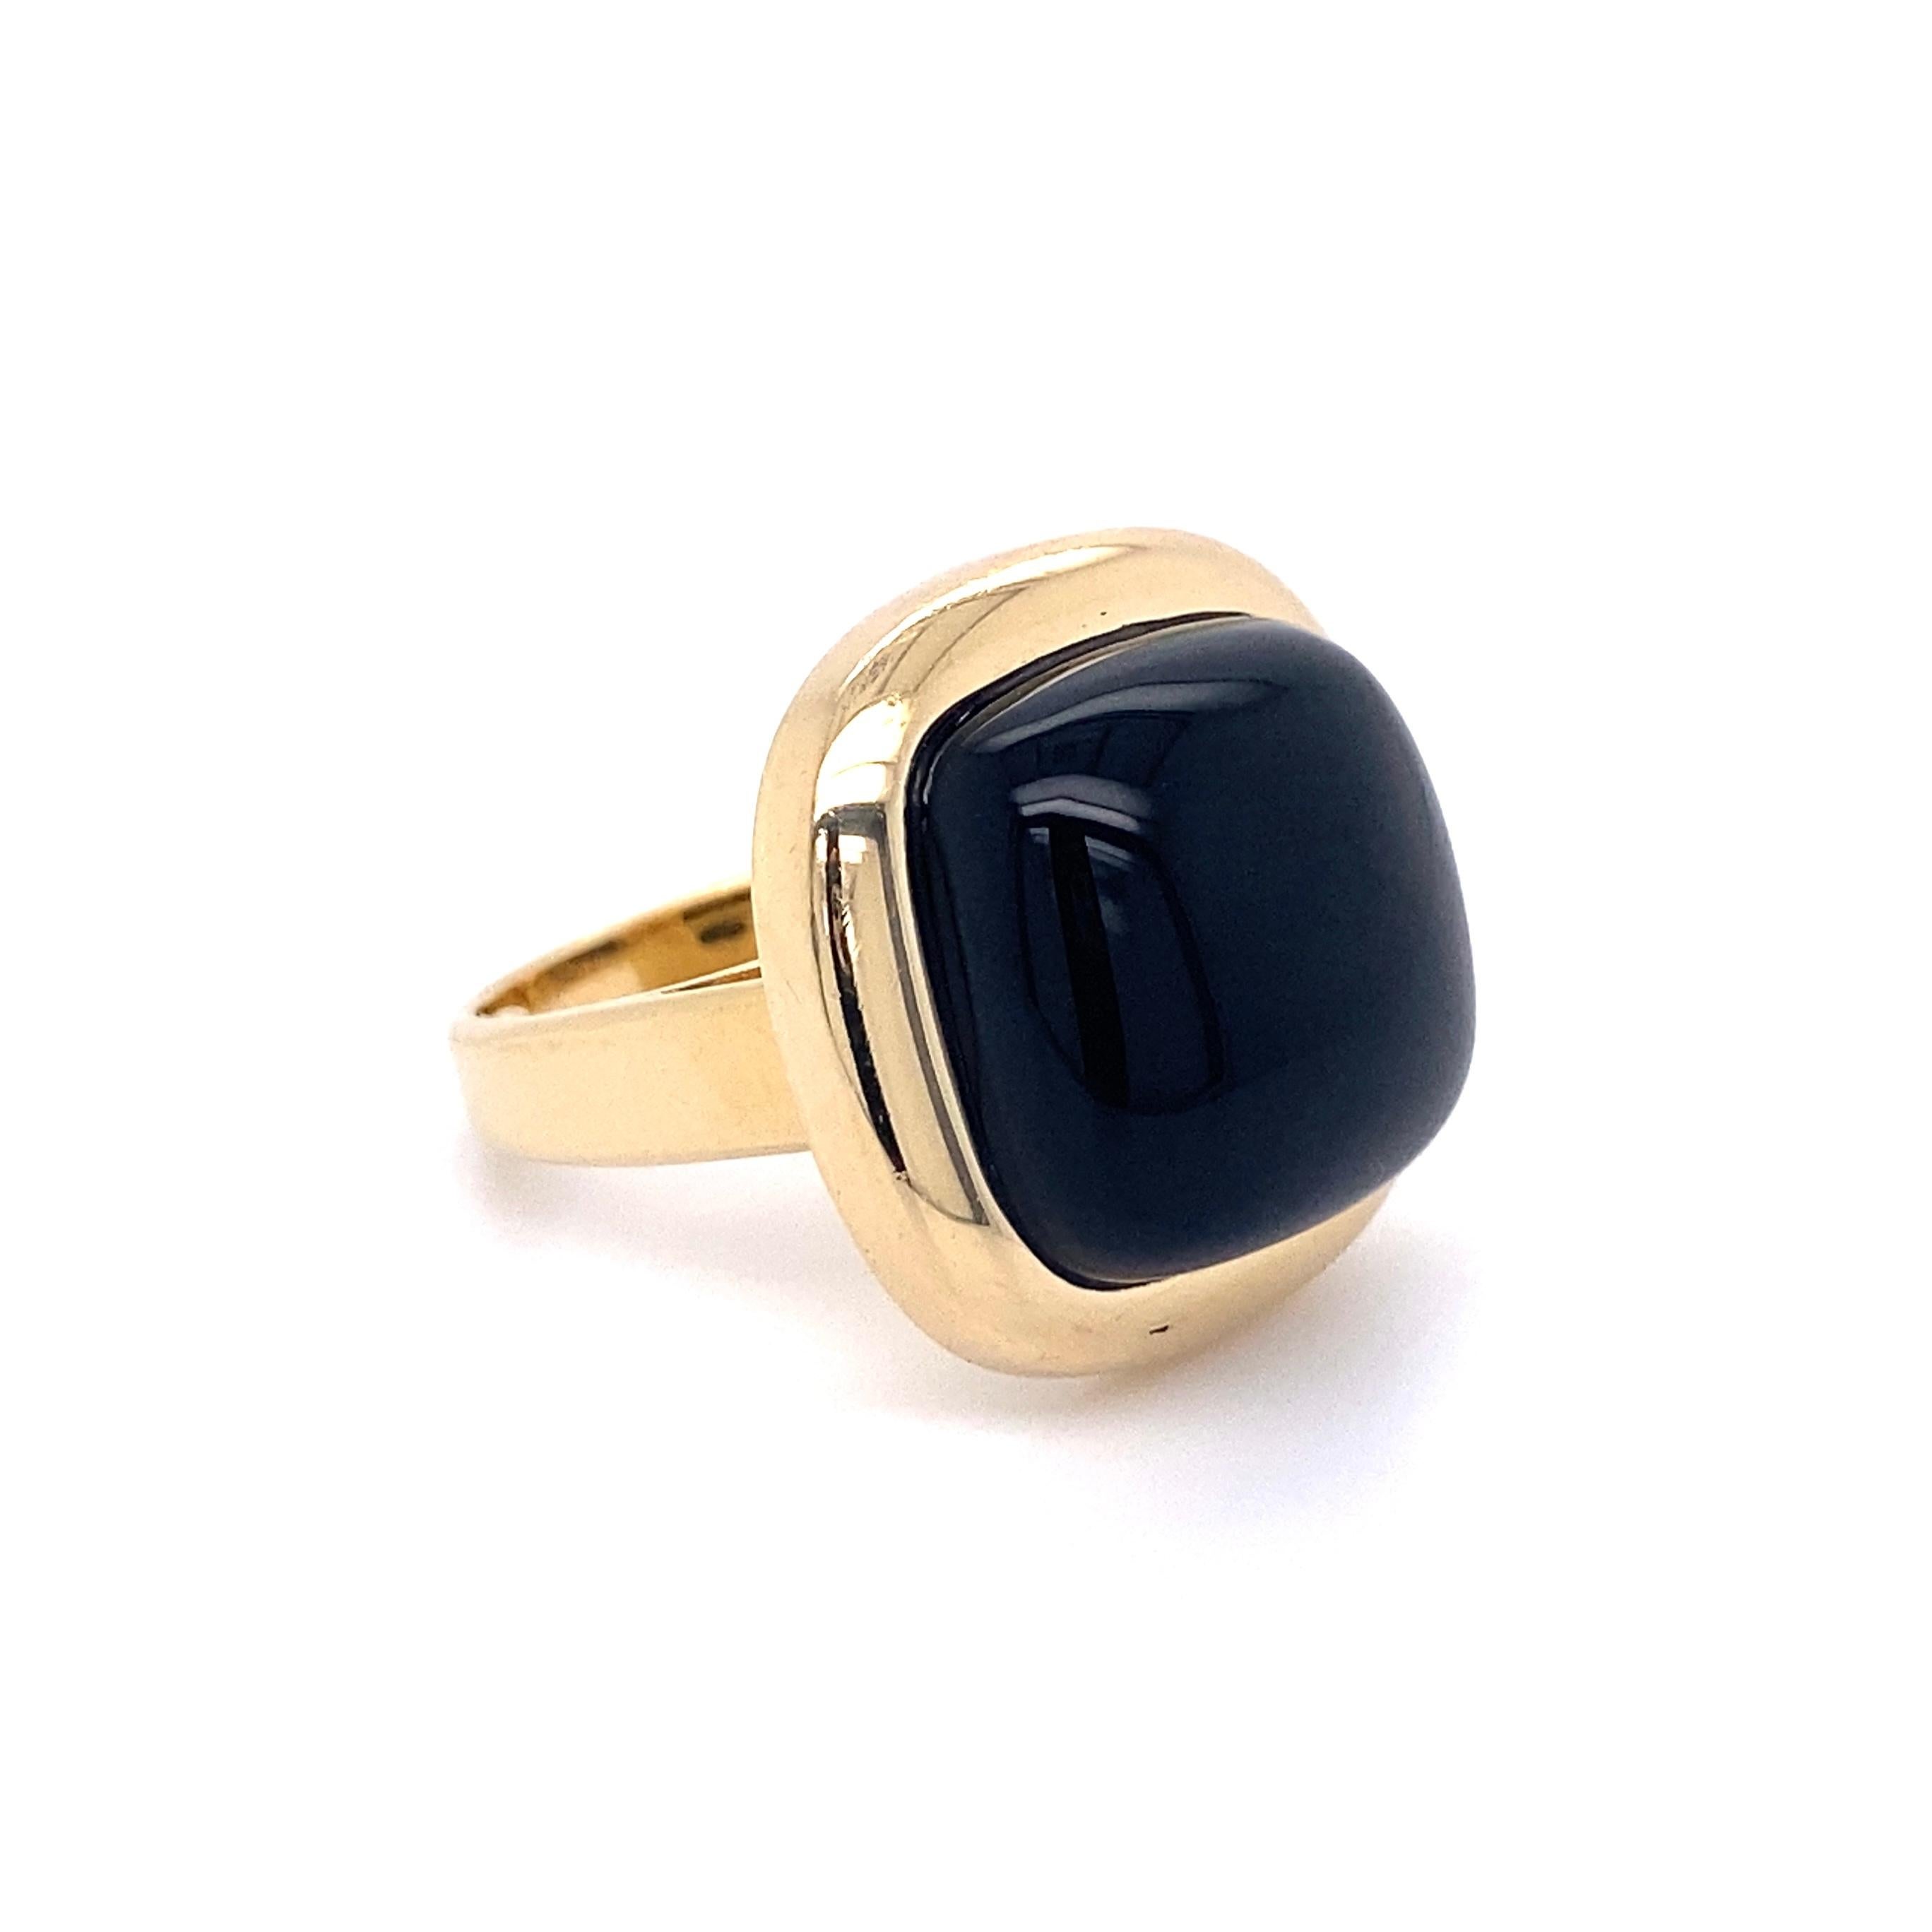 Handsome Fine Quality Gent's Classic Cushion Onyx 14K Gelbgold Signet Ring. Mitte 1,15 